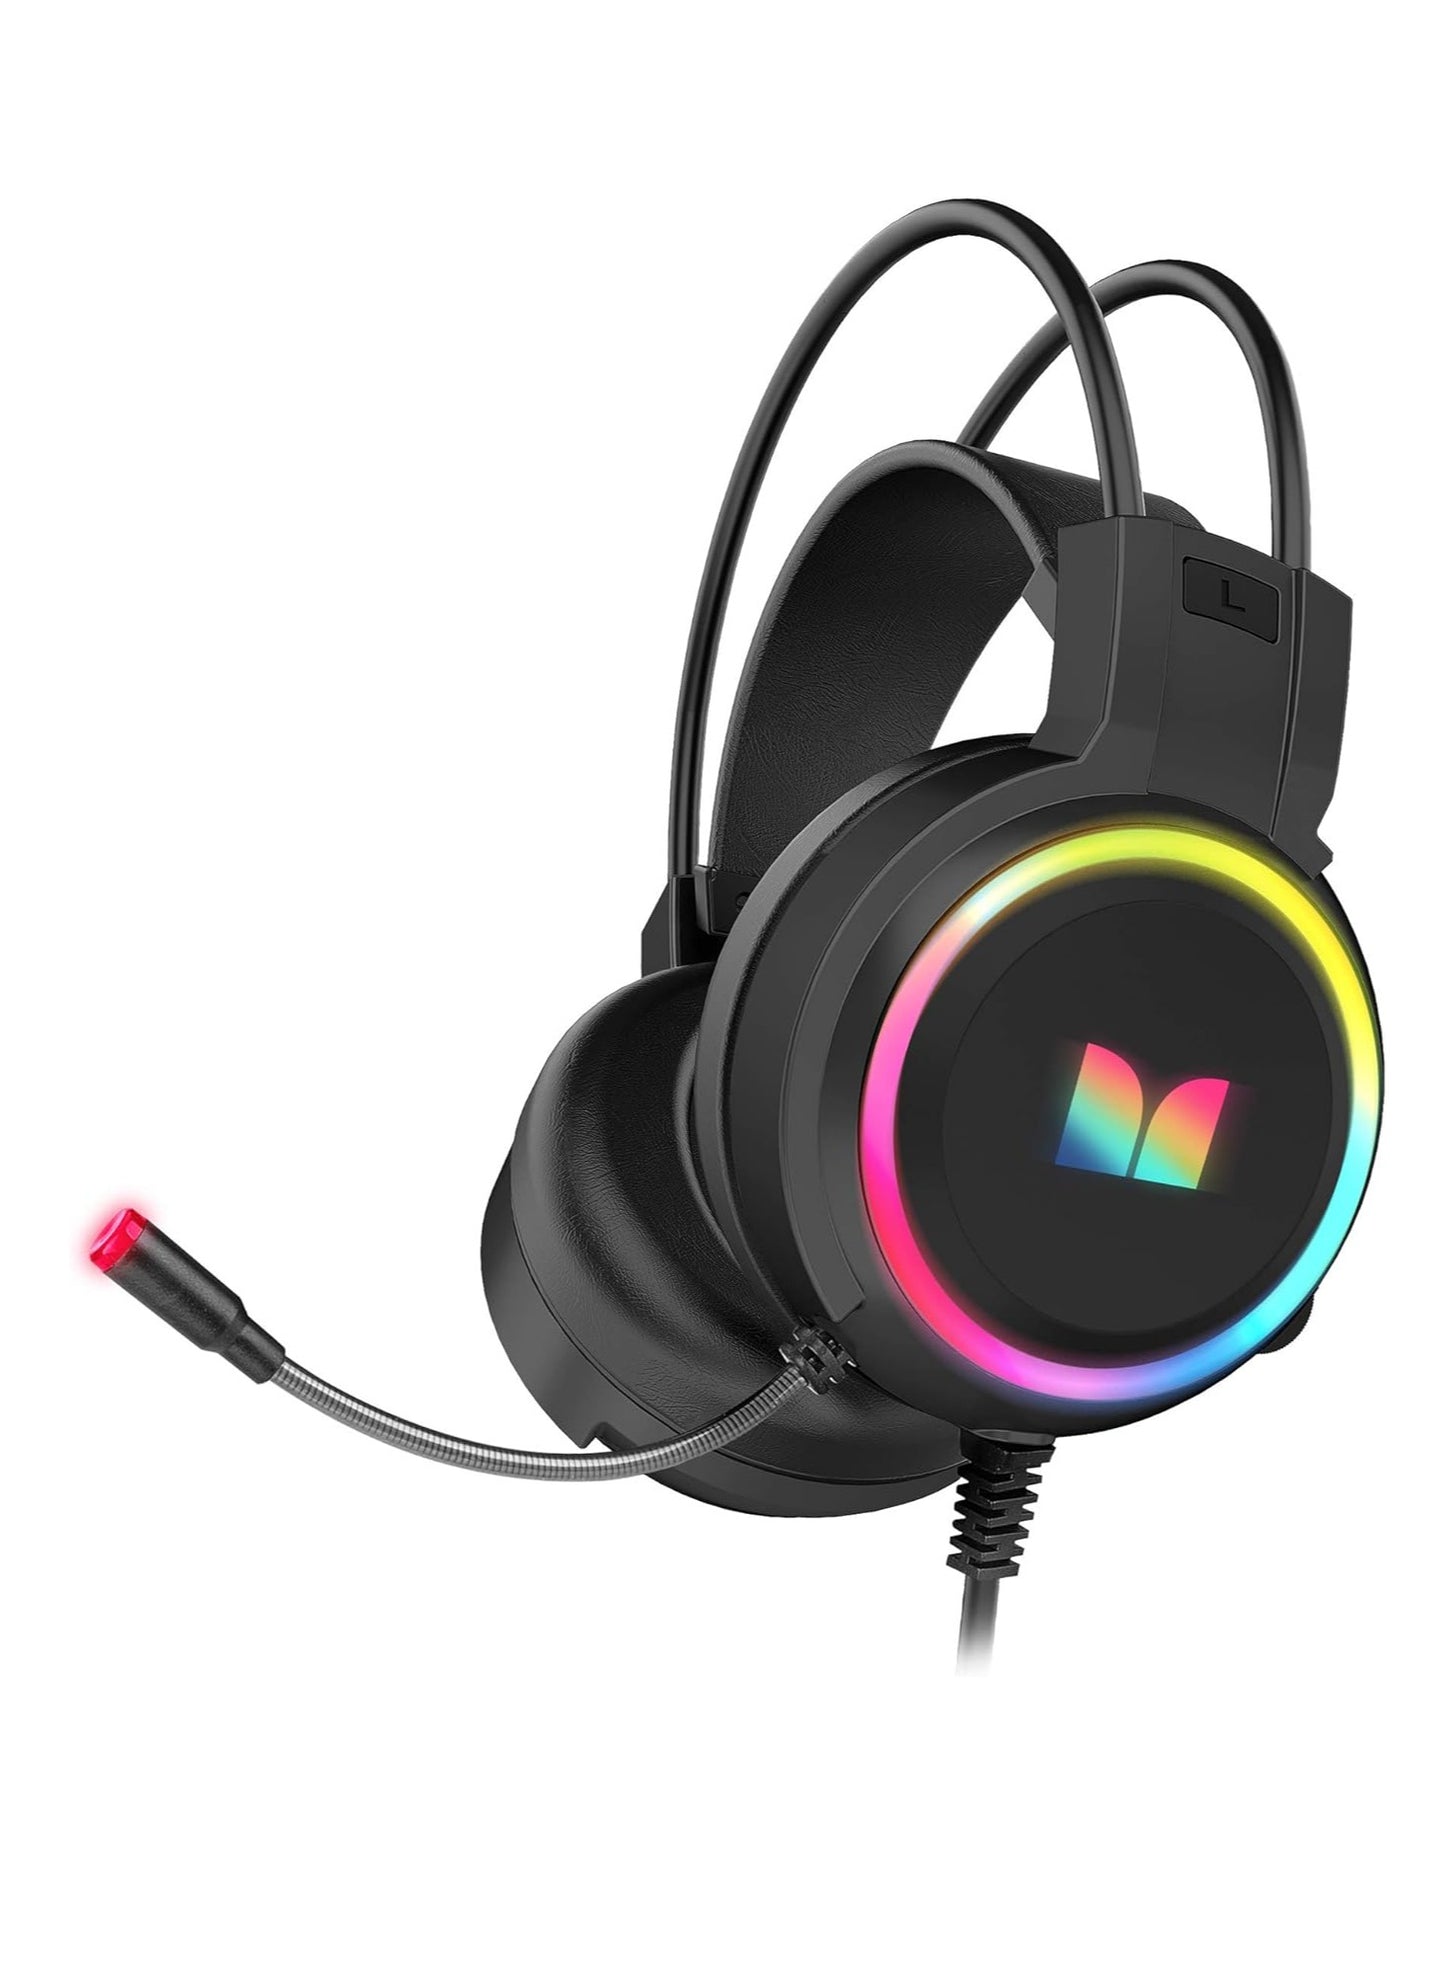 RGB Gaming Headset - Stereo Surround Sound - 50MM Drivers - Built-In Volume Control - Connect with 3.5mm X2 & USB For Lighting | For PC